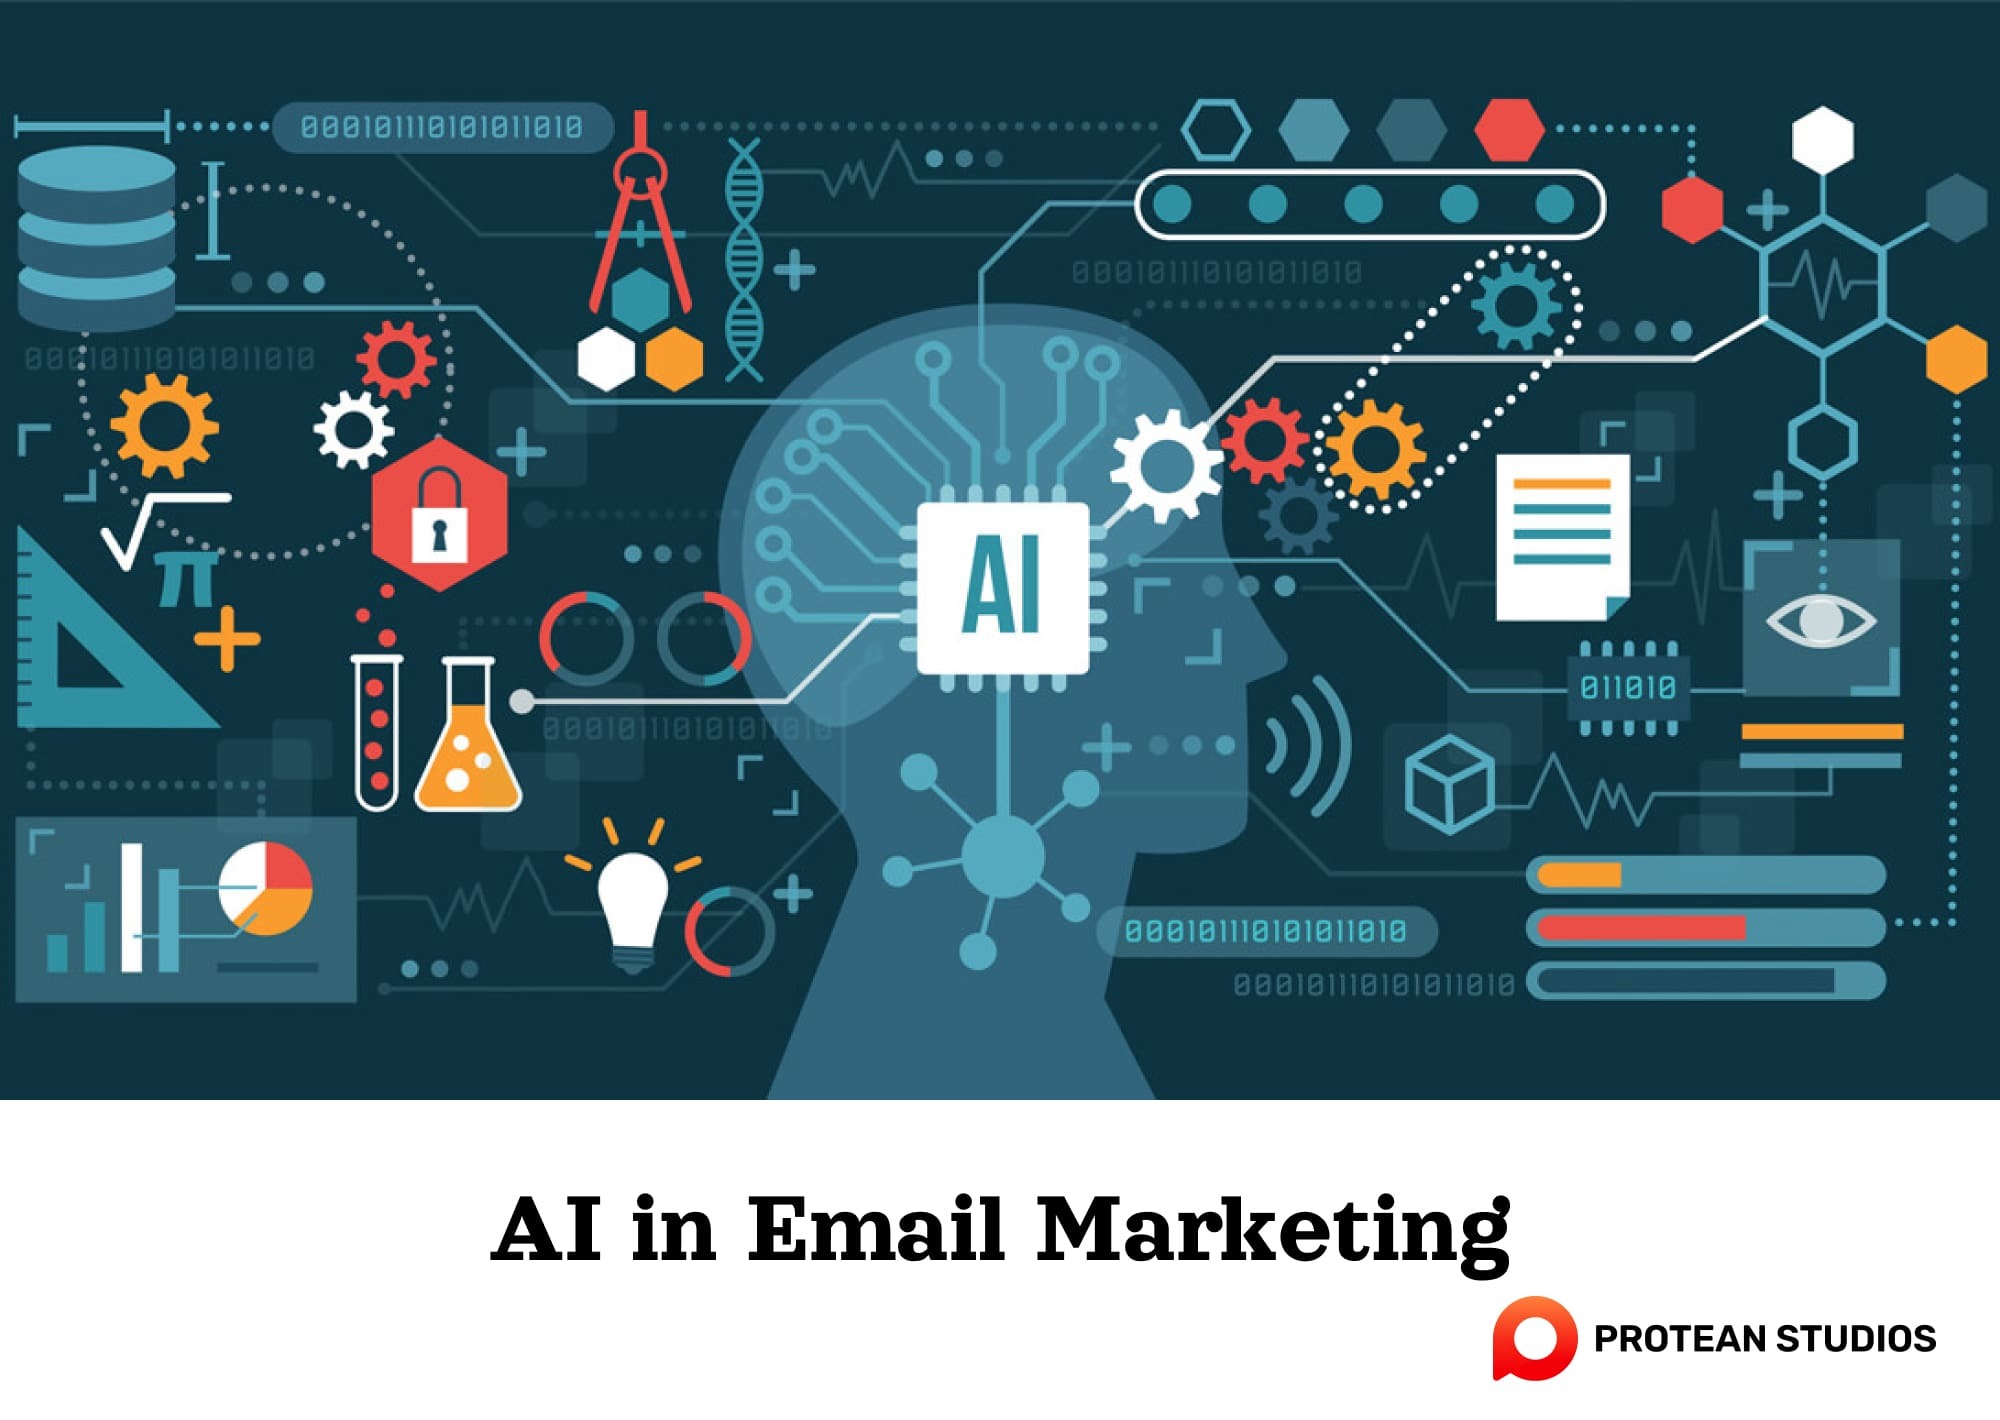 Feature of AI in email marketing